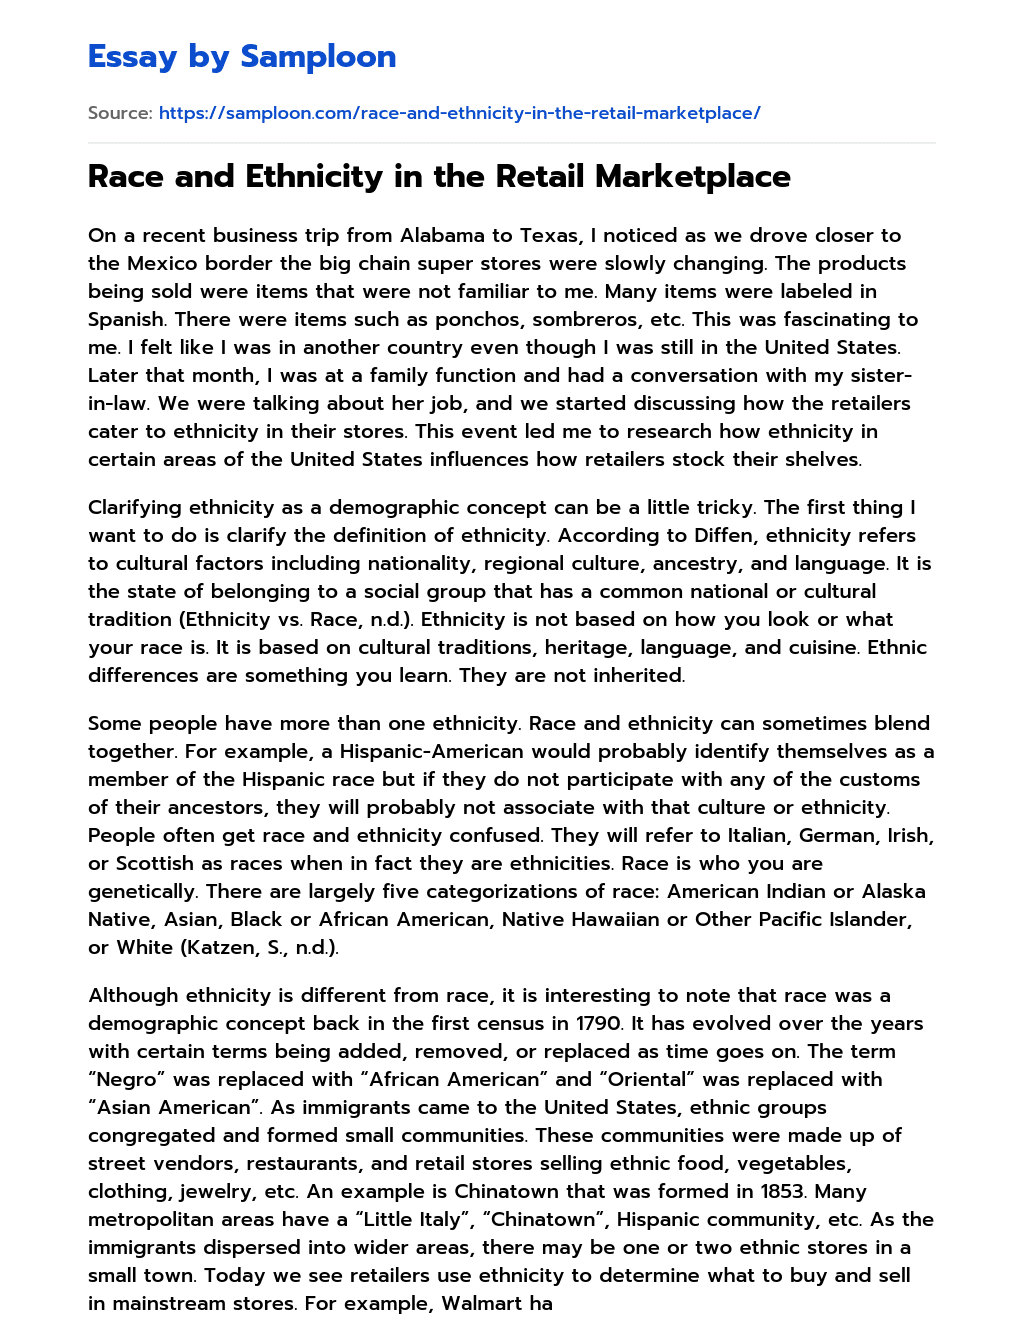 Race and Ethnicity in the Retail Marketplace essay